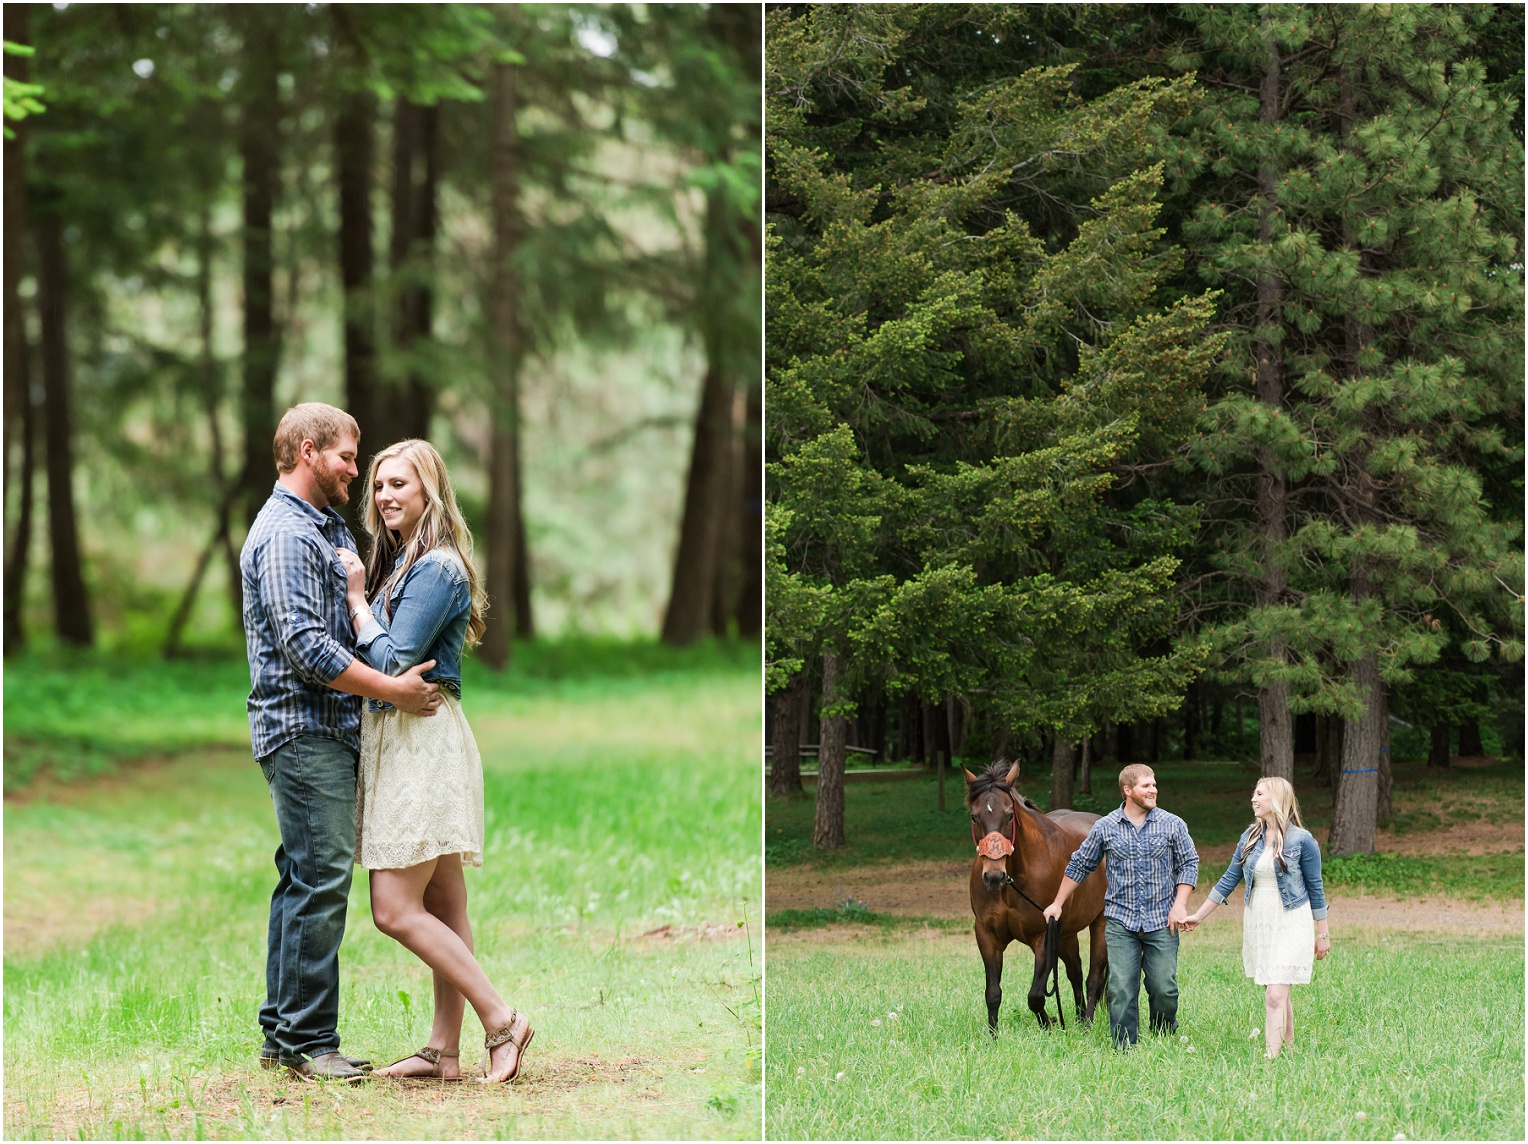 Engagement Shoot with horses Elk Haven Equestrian Center Engagement Session Cle Elum WA Adam and Jessica_0005